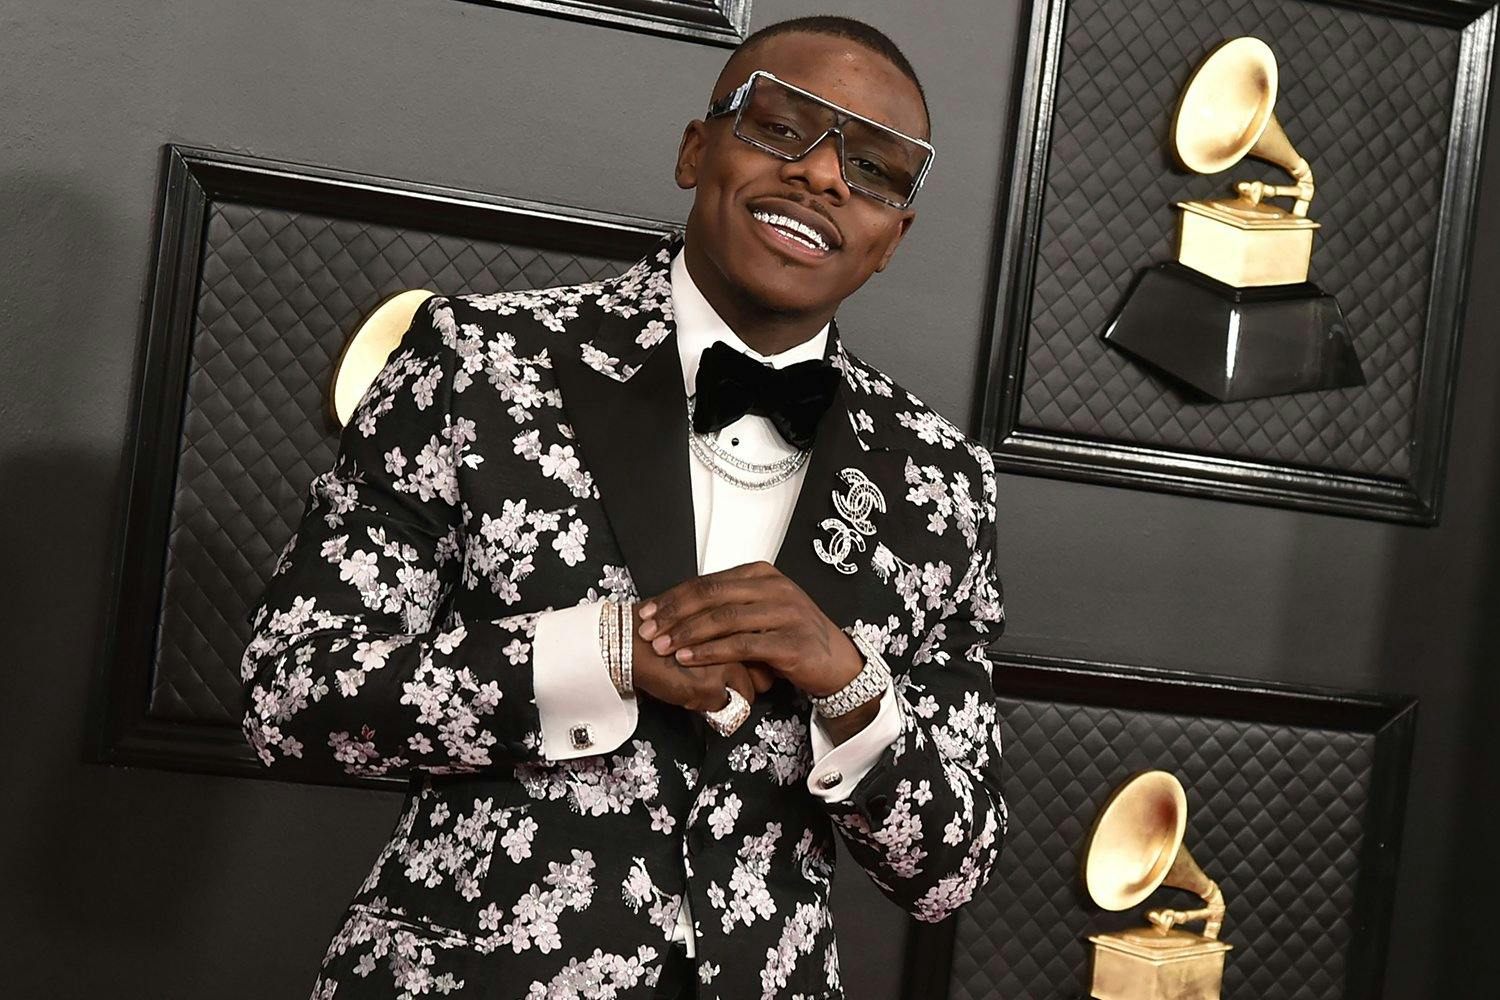 DaBaby attends the 62nd Annual Grammy Awards at Staples Center on January 26, 2020 in Los Angeles, CA. (Photo by David Crotty/Patrick McMullan via Getty Images)